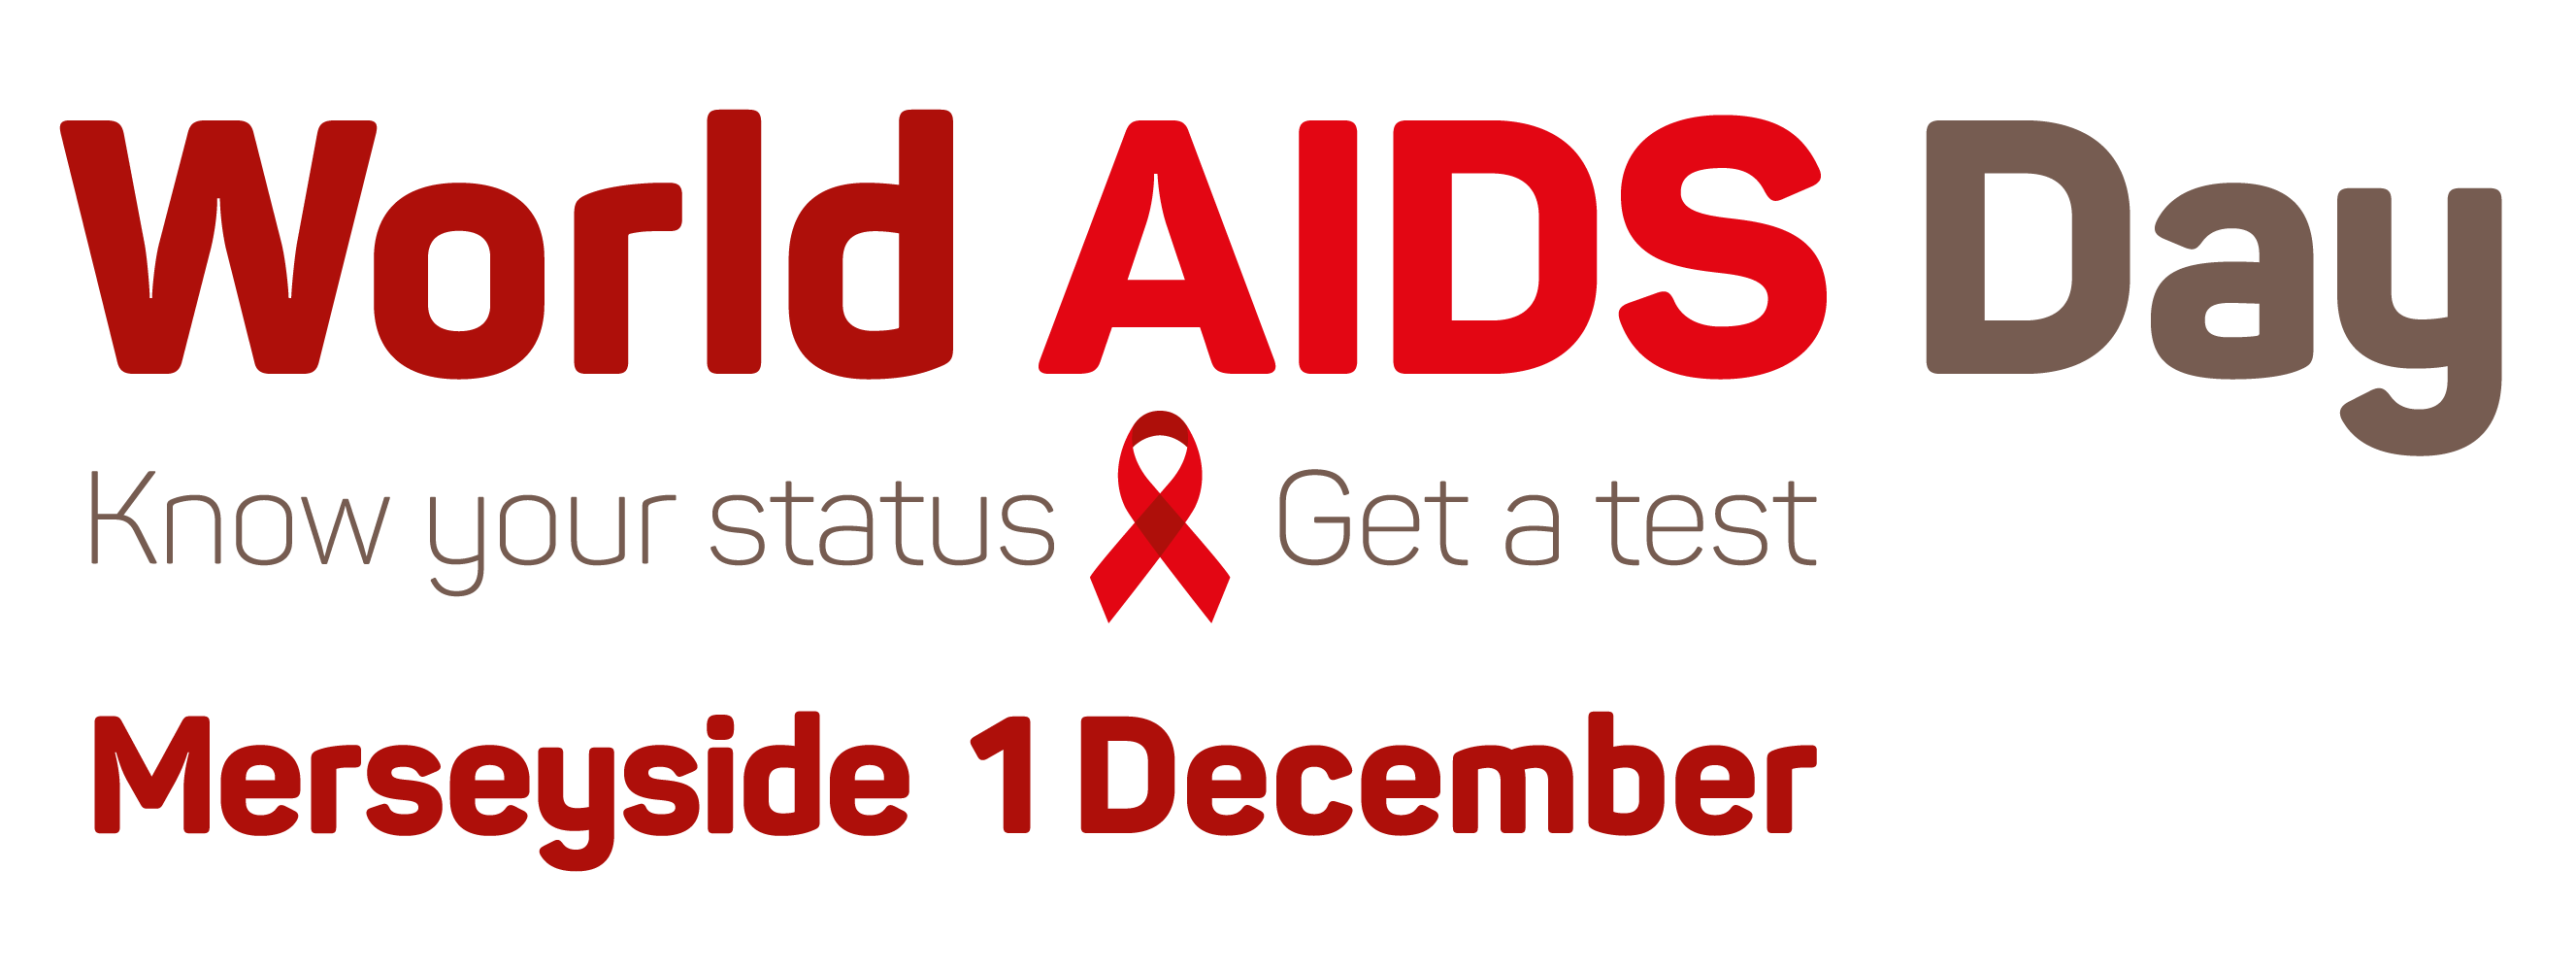 World Aids Day know your status get a test meseyside 1 december picture